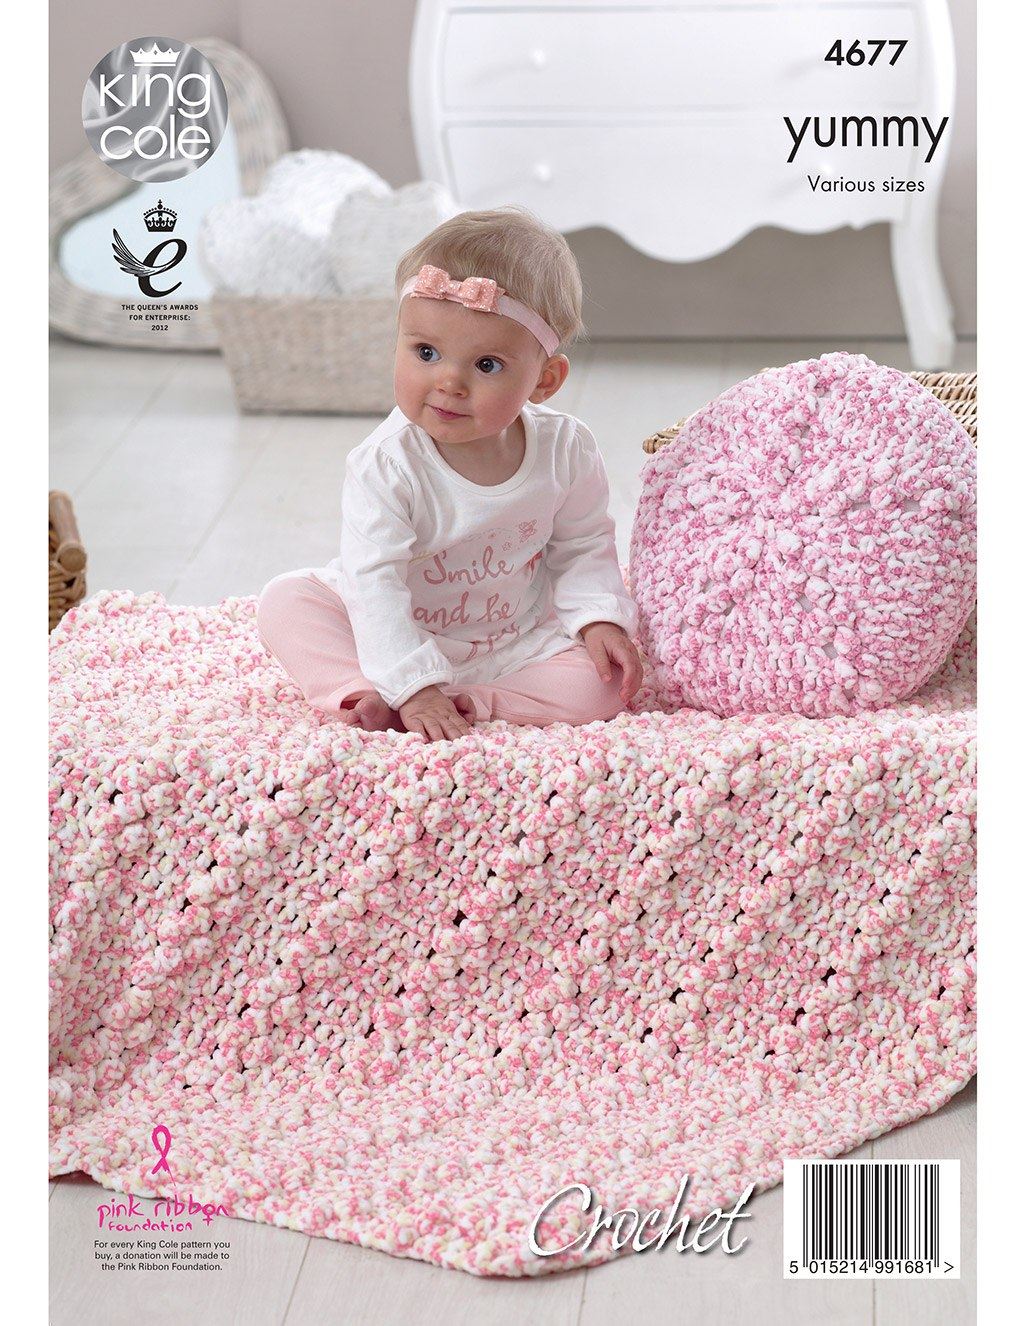 King Cole Yummy knitting pattern (4677) crochet cushions and blankets